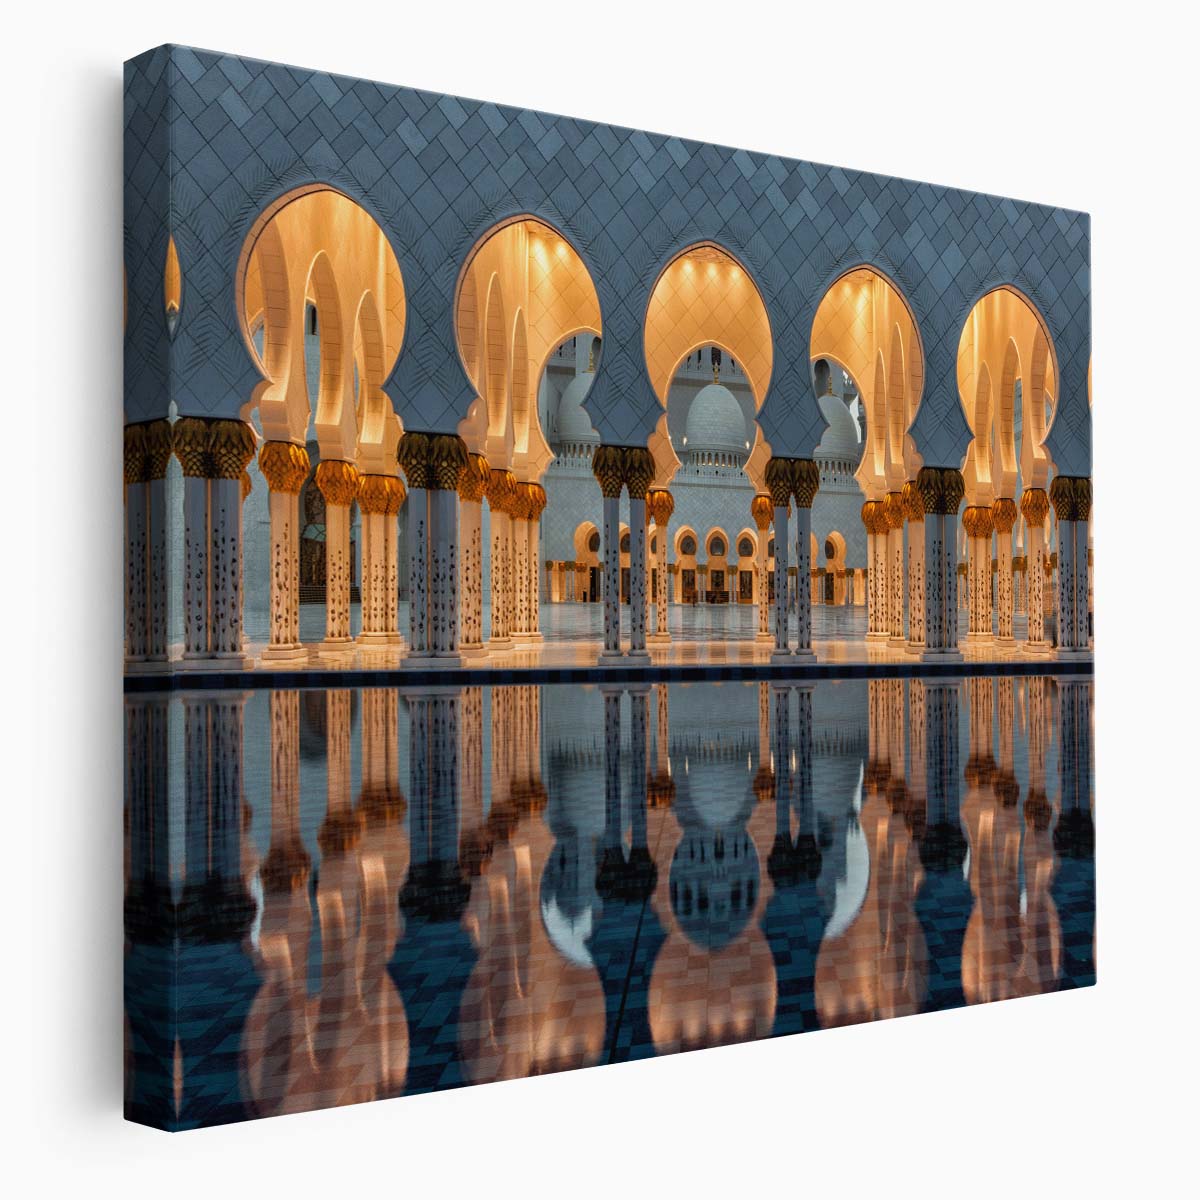 Sacred Sheikh Zayed Mosque Reflection Wall Art by Luxuriance Designs. Made in USA.